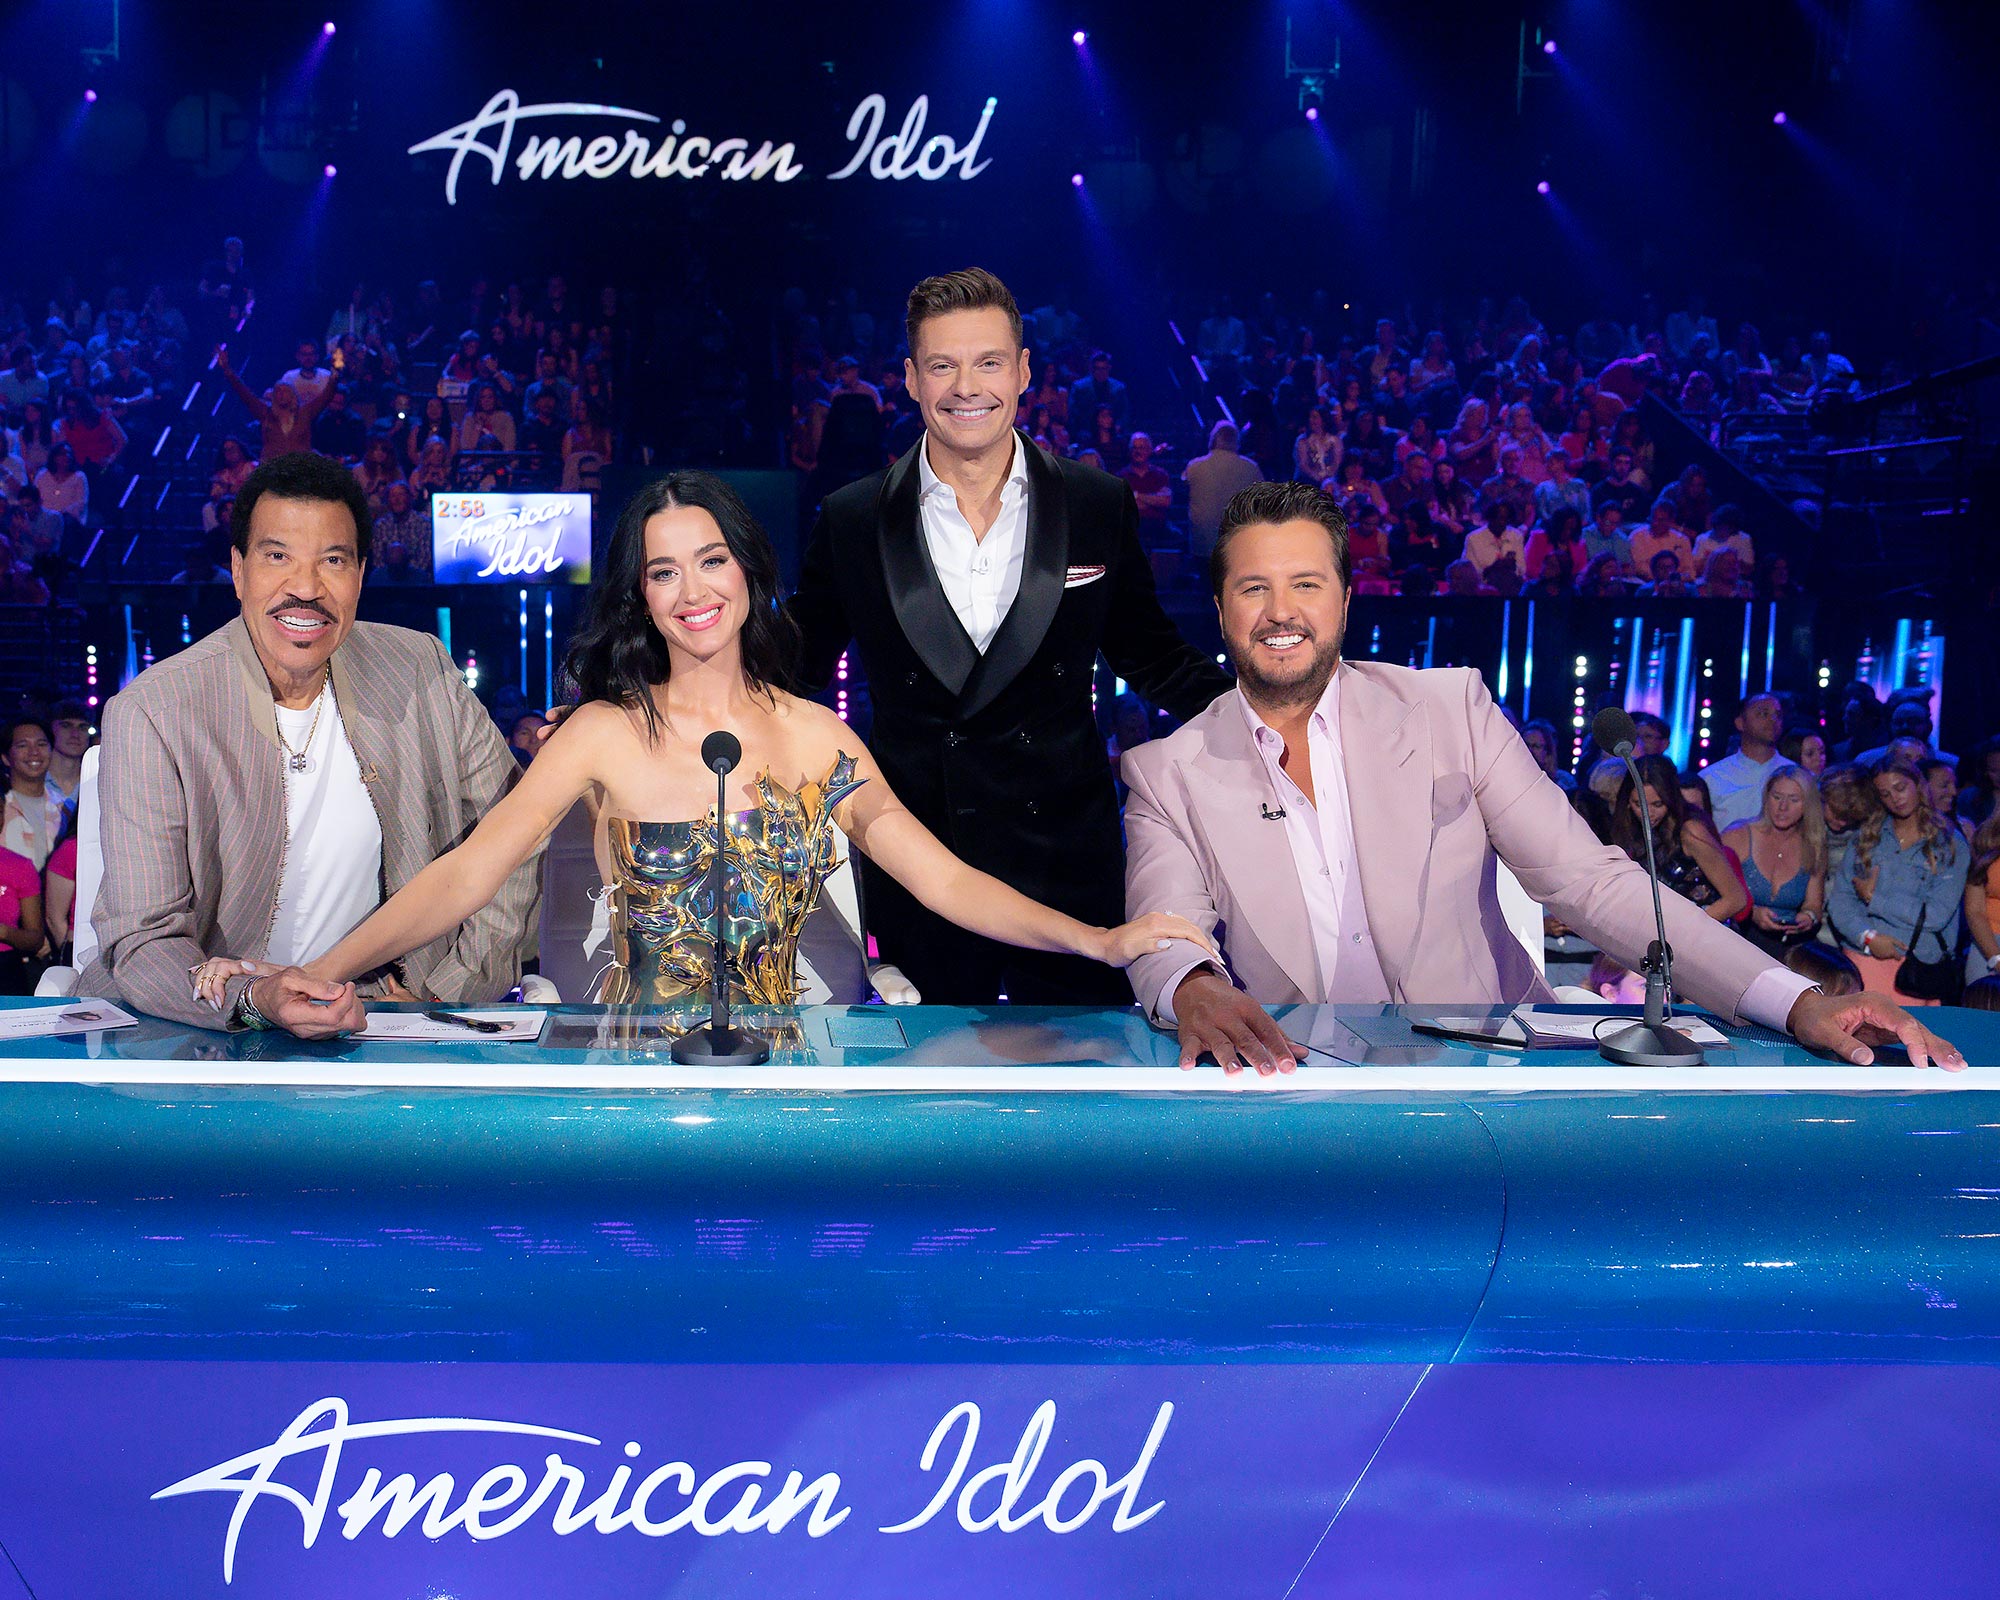 Every Celeb That’s Been Floated to Replace Katy Perry on ‘American Idol’